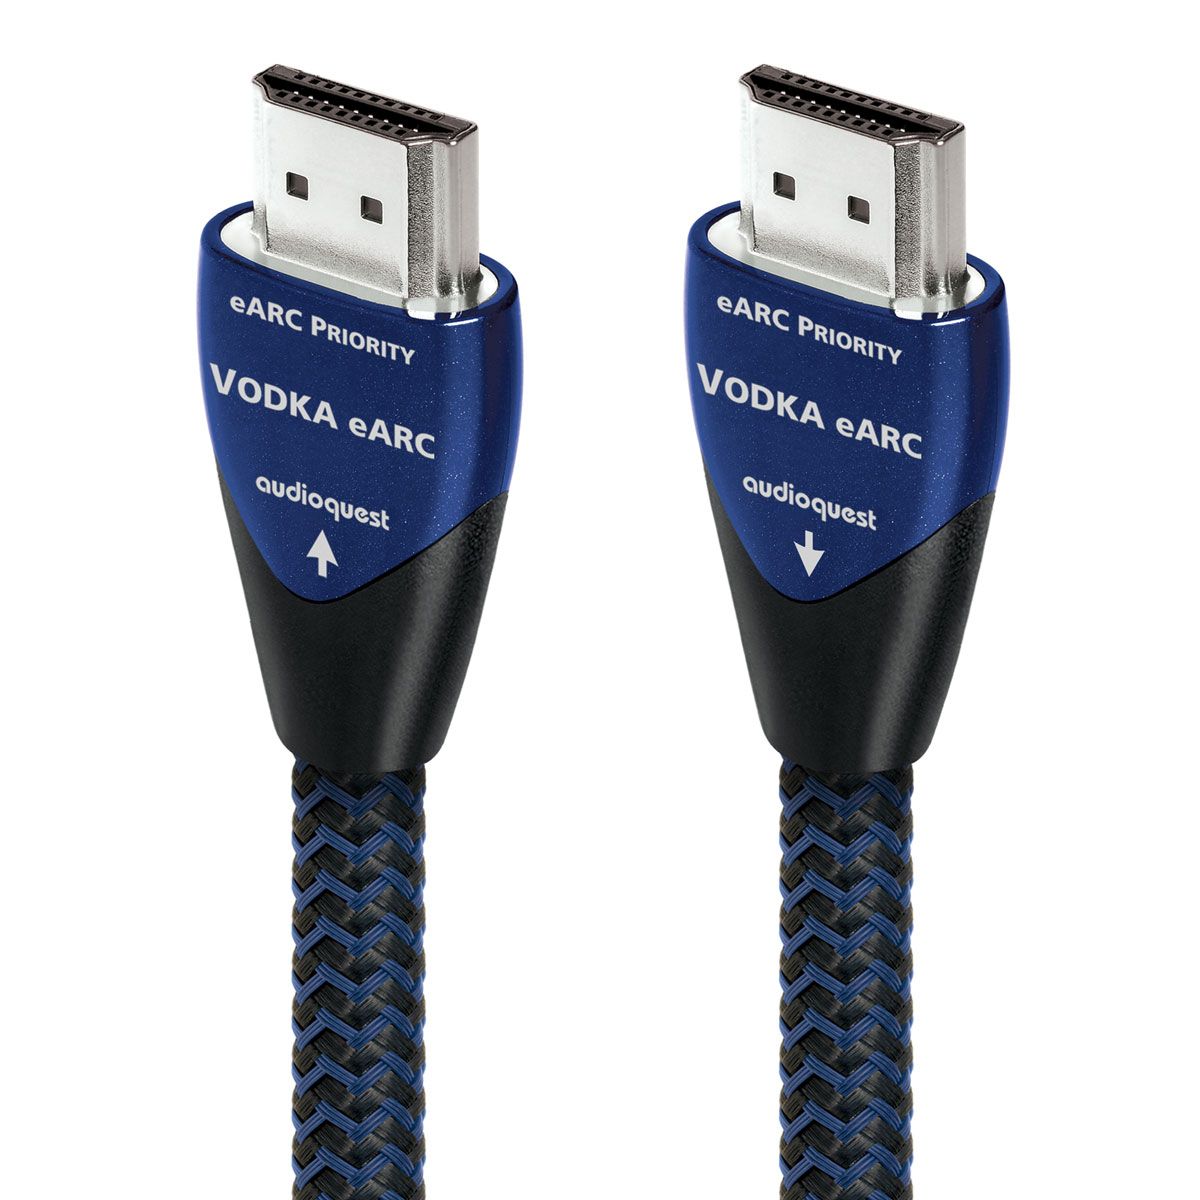 AudioQuest Vodka eARC Priority 48G HDMI Cable